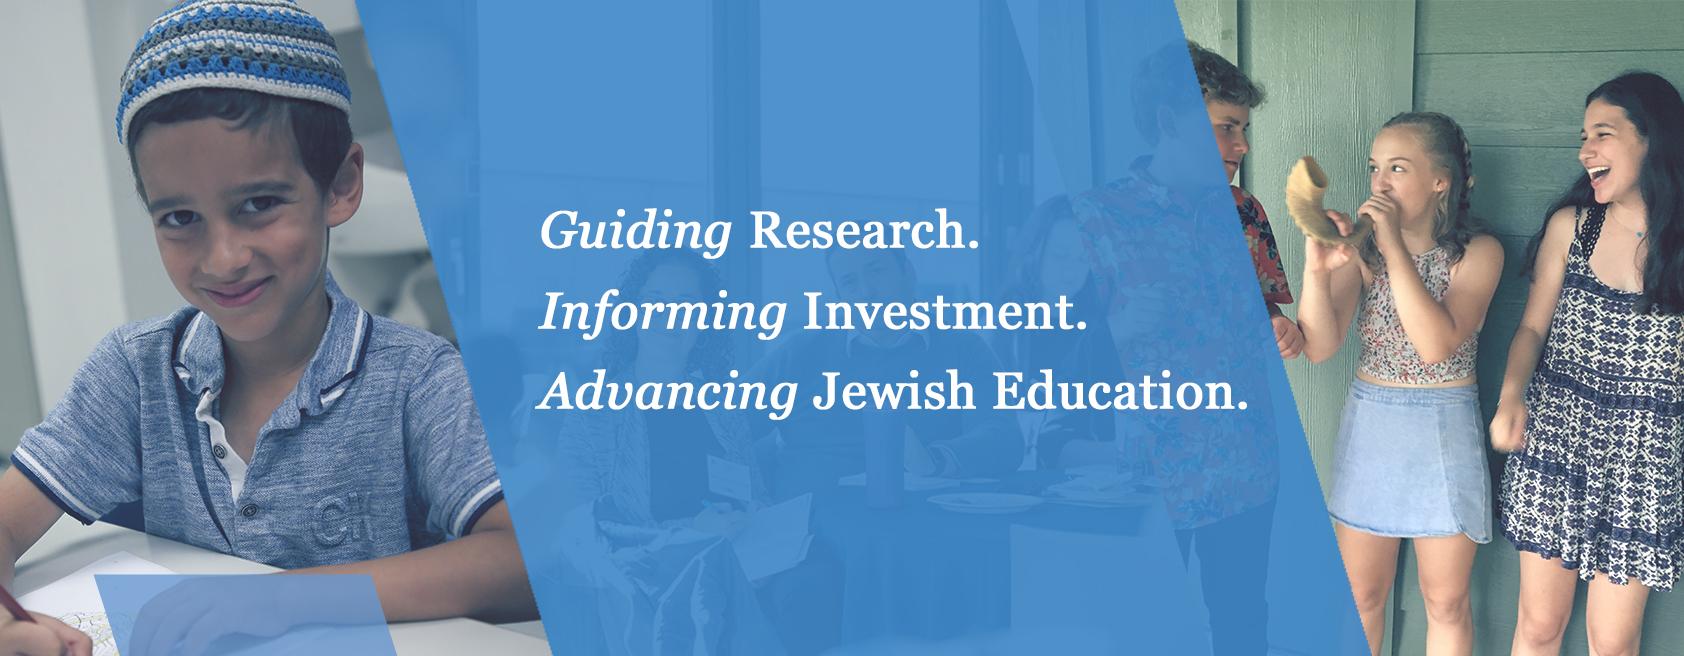 Decorative header that includes three photos that include Jewish children and professionals in the background; a blue background behind text that reads "Guiding Research. Informing Investment. Advancing Jewish Education."